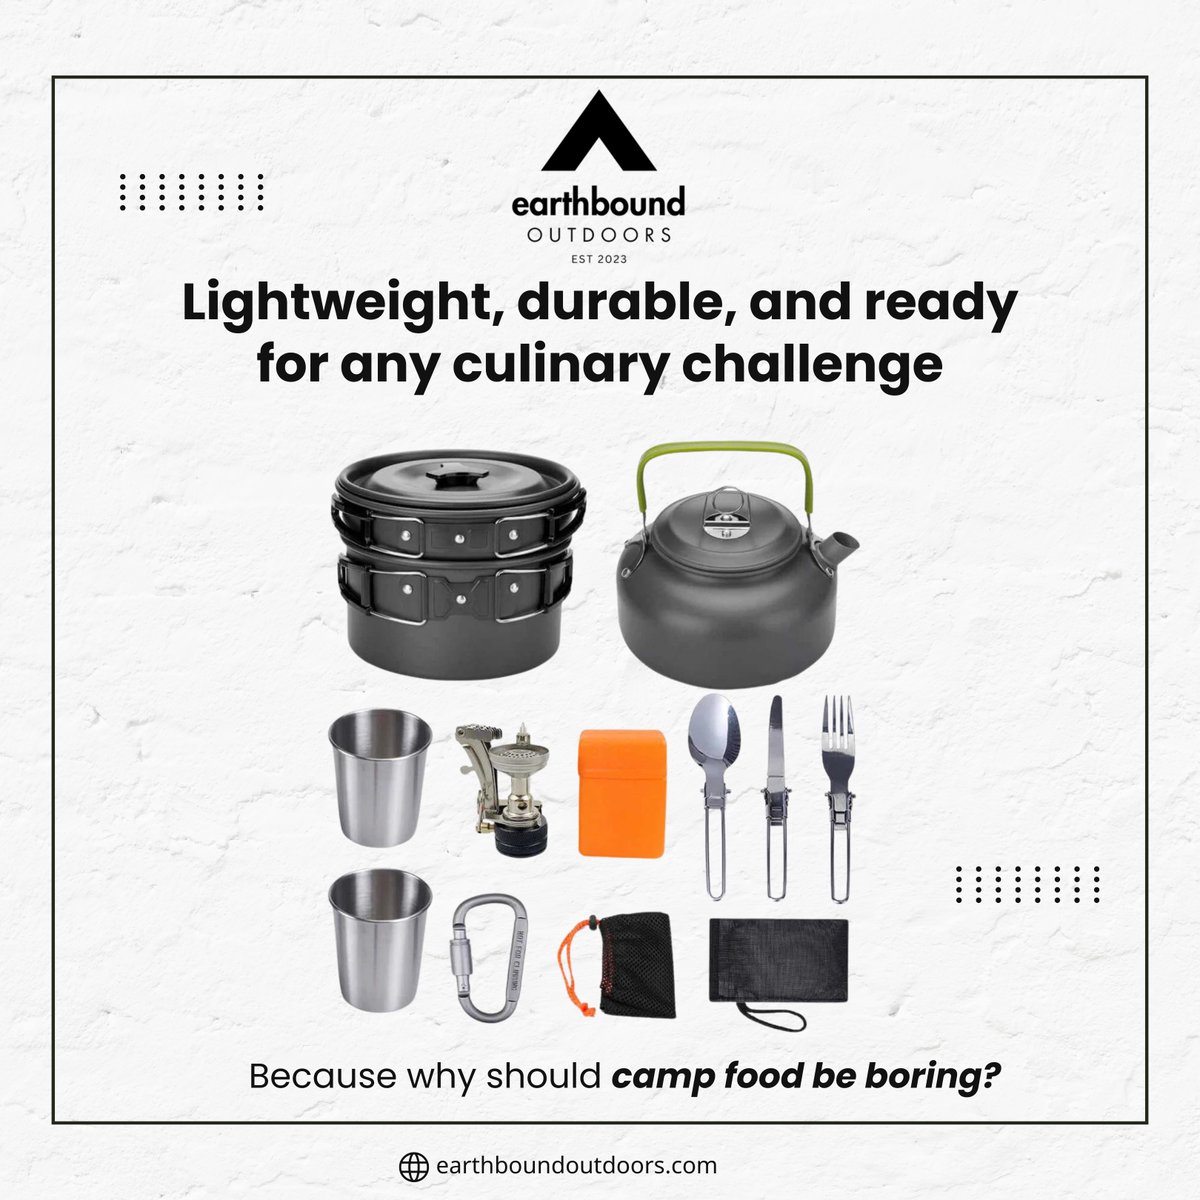 Turn the great outdoors into your own gourmet kitchen! 🍳🌲 Our Portable Camping Cookware Kit has everything you need to whip up delicious meals wherever adventure takes you. Lightweight, durable, and ready for any culinary challenge — because why should camp food be boring?